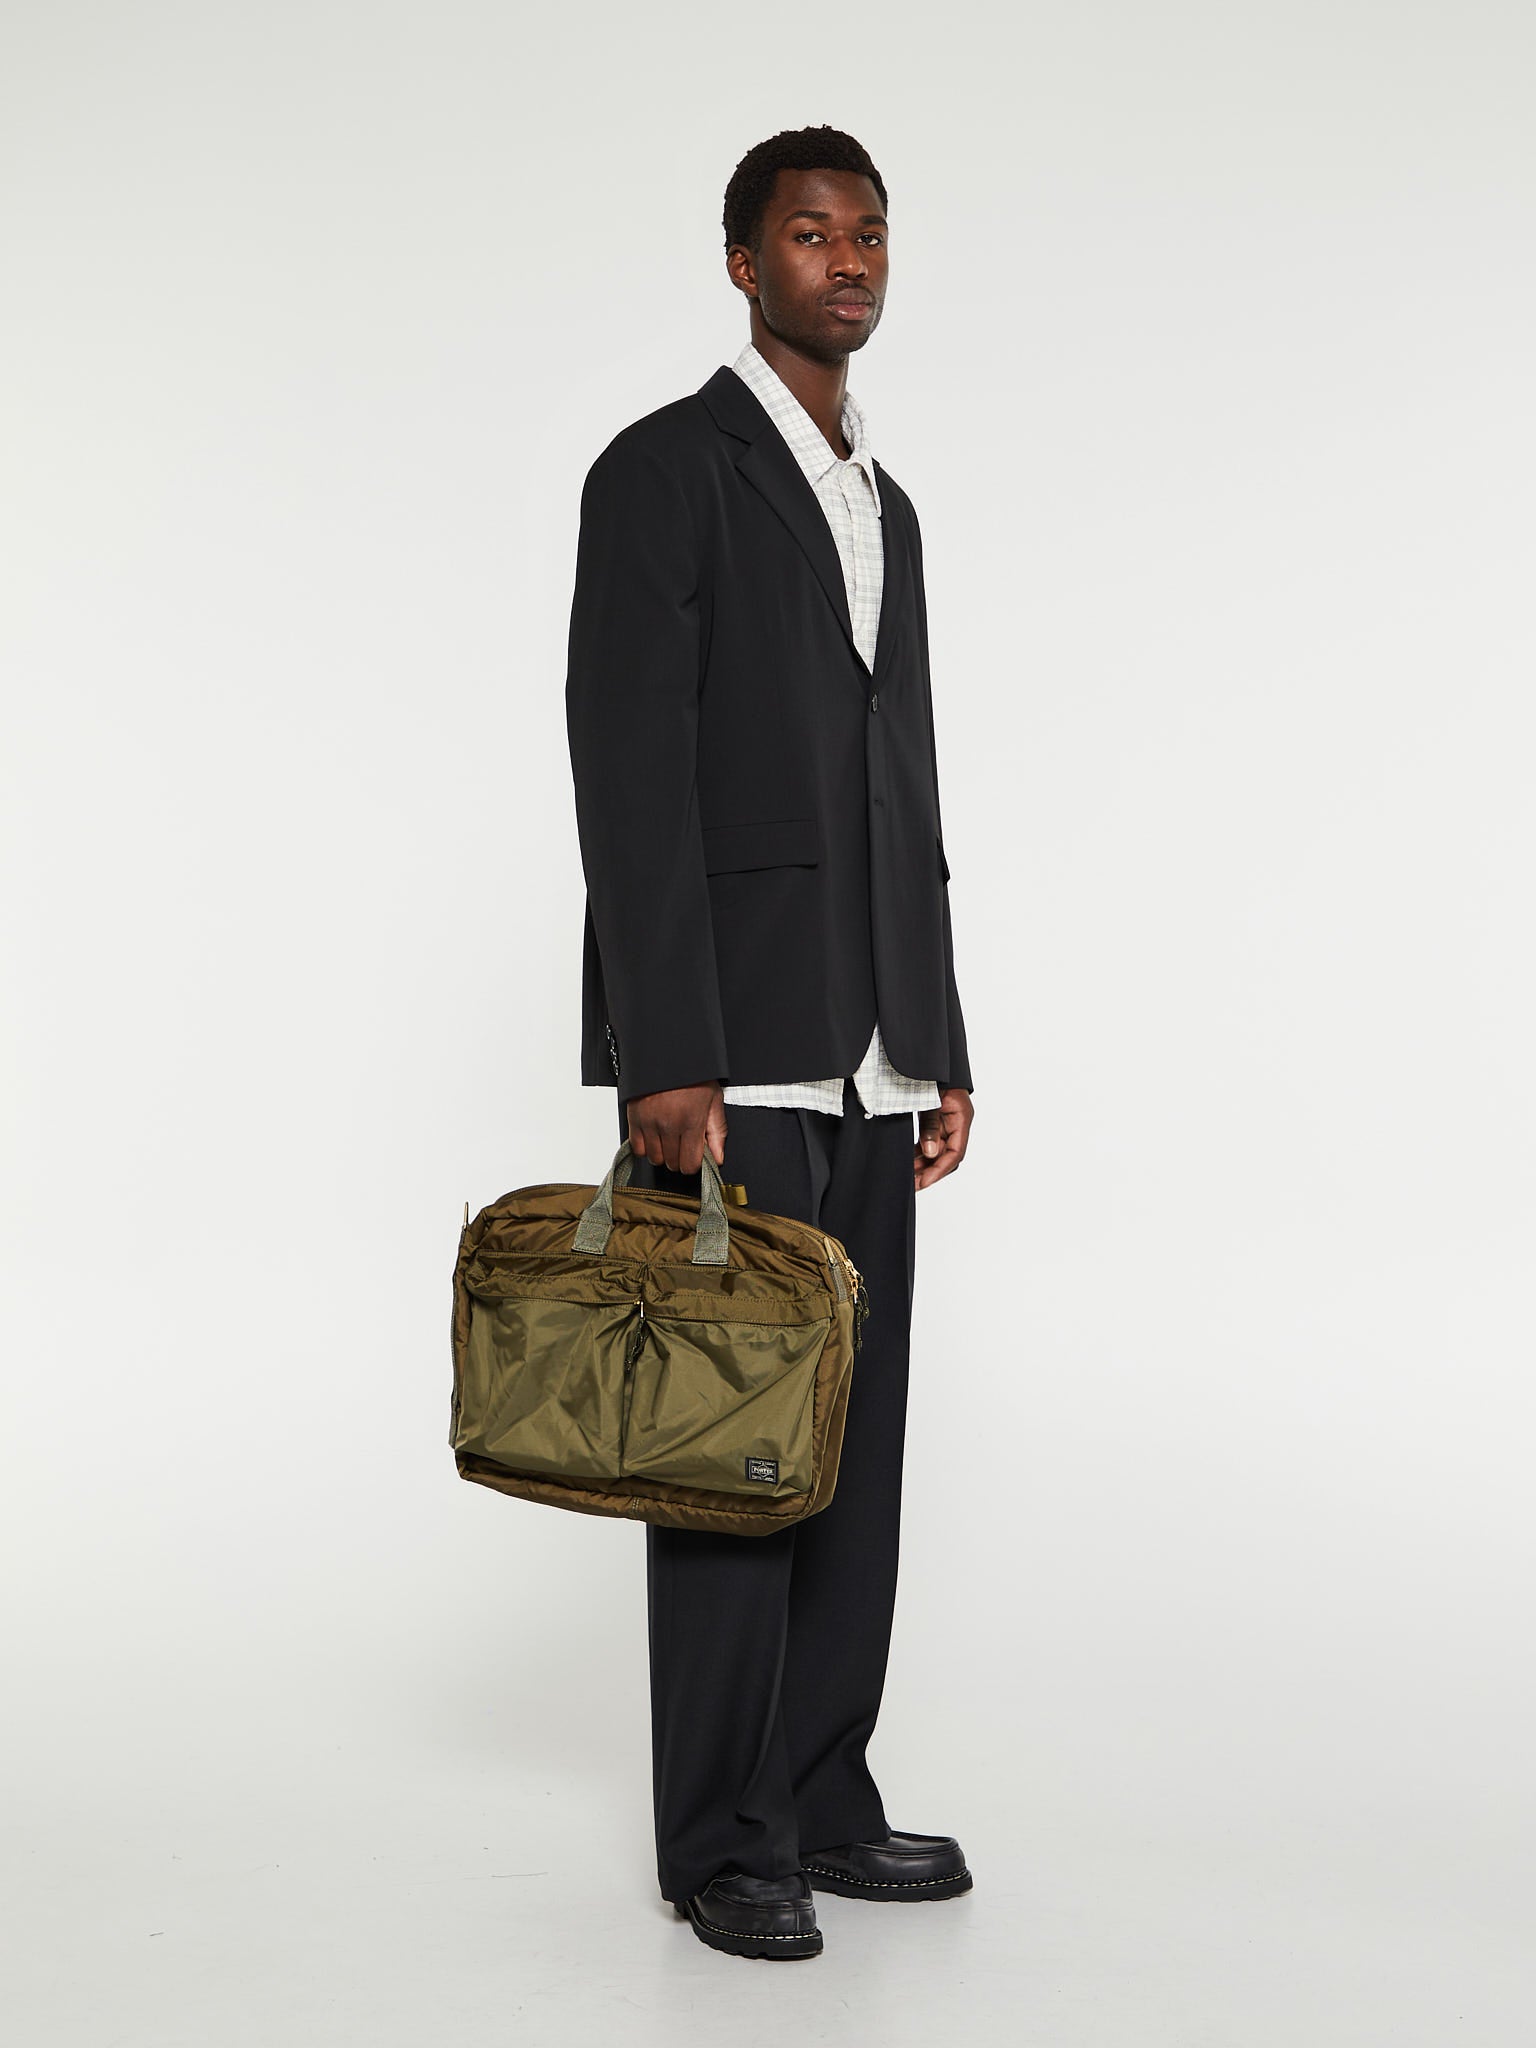 Force 3Way Briefcase in Olive Drab